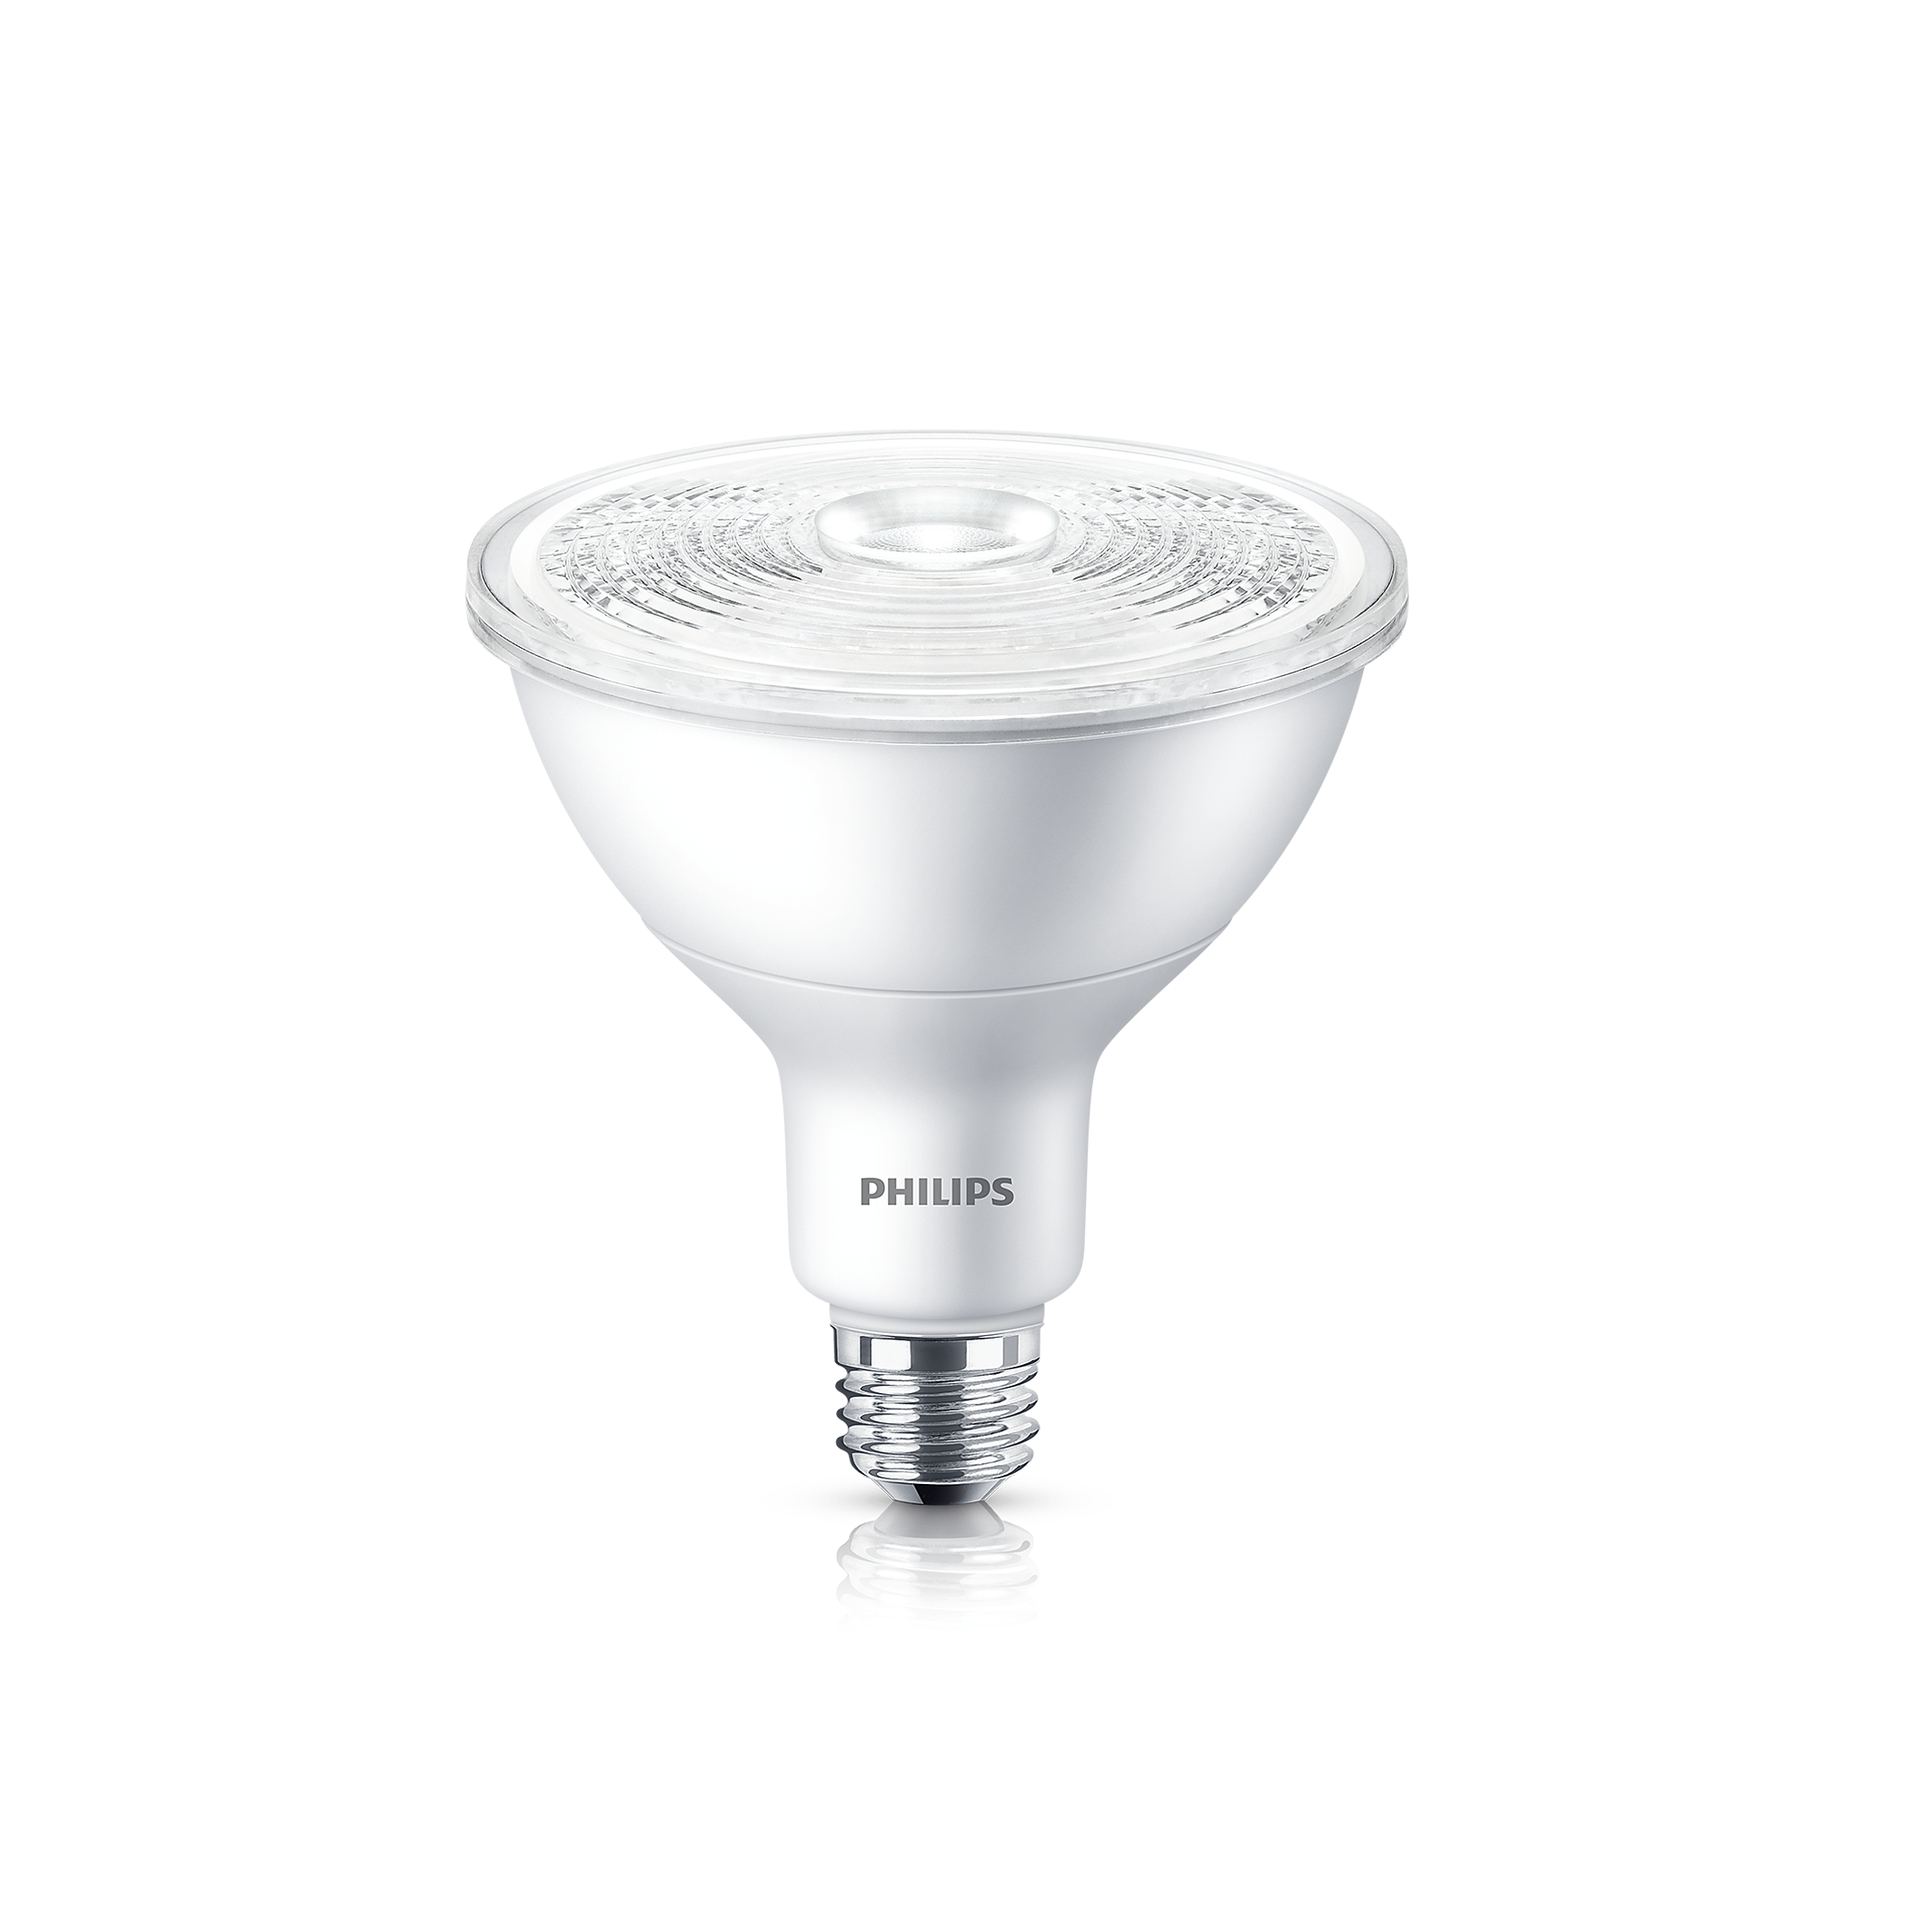 Philips myLiving 564804316 Surface Mounted Spotlight Includes 1x 35 W Light Bulb 